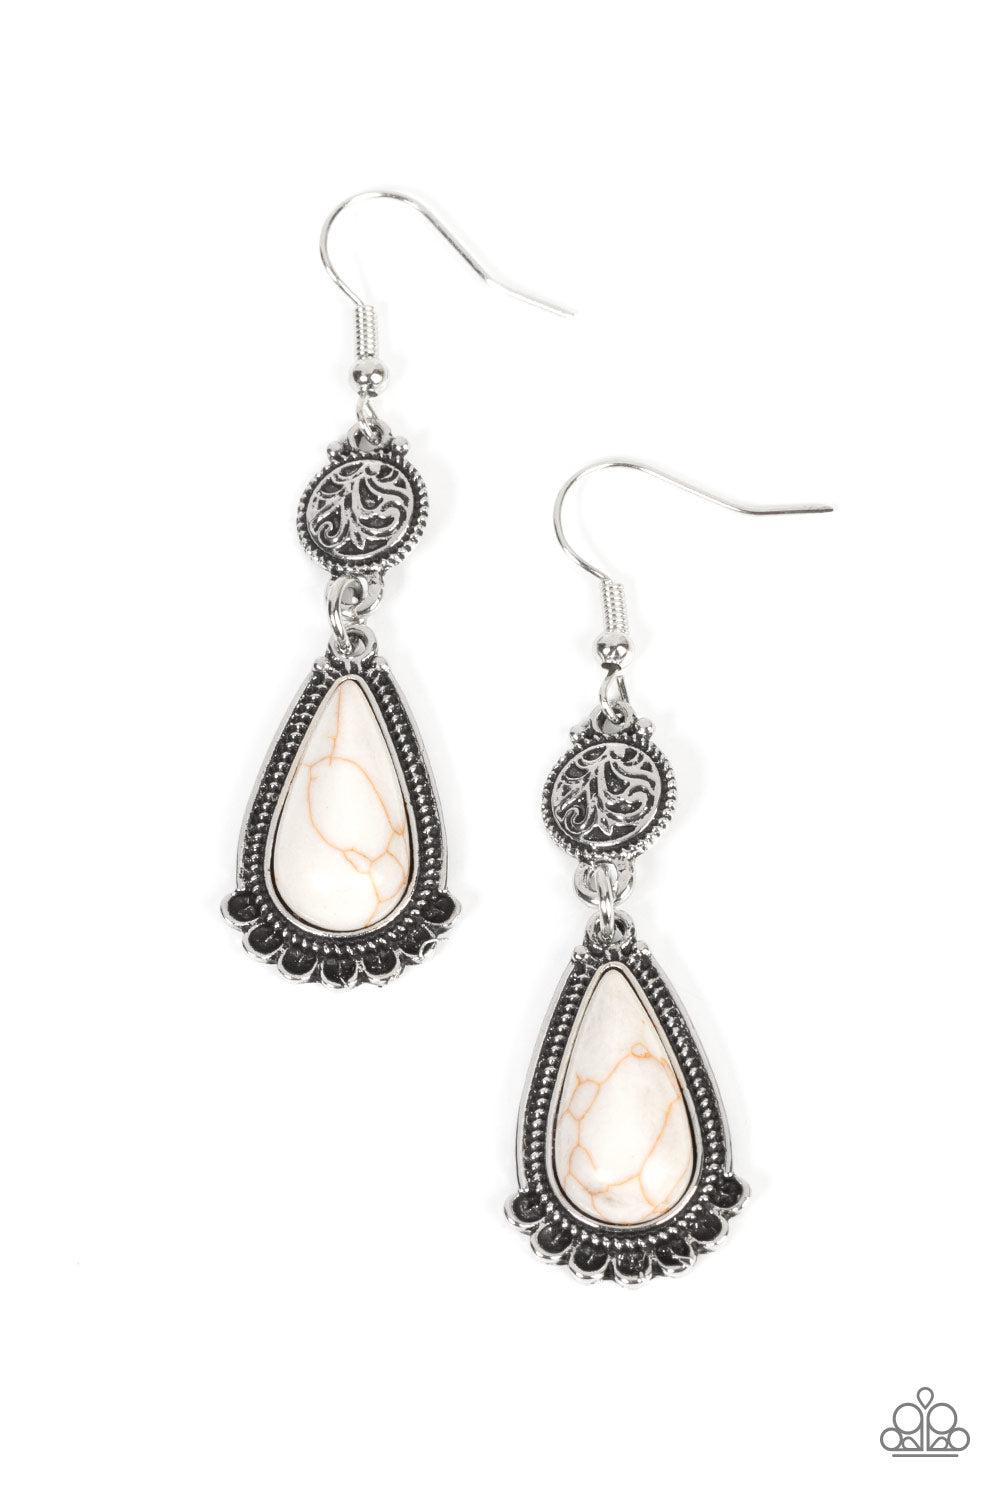 Montana Mountains White Stone Earrings - Paparazzi Accessories- lightbox - CarasShop.com - $5 Jewelry by Cara Jewels